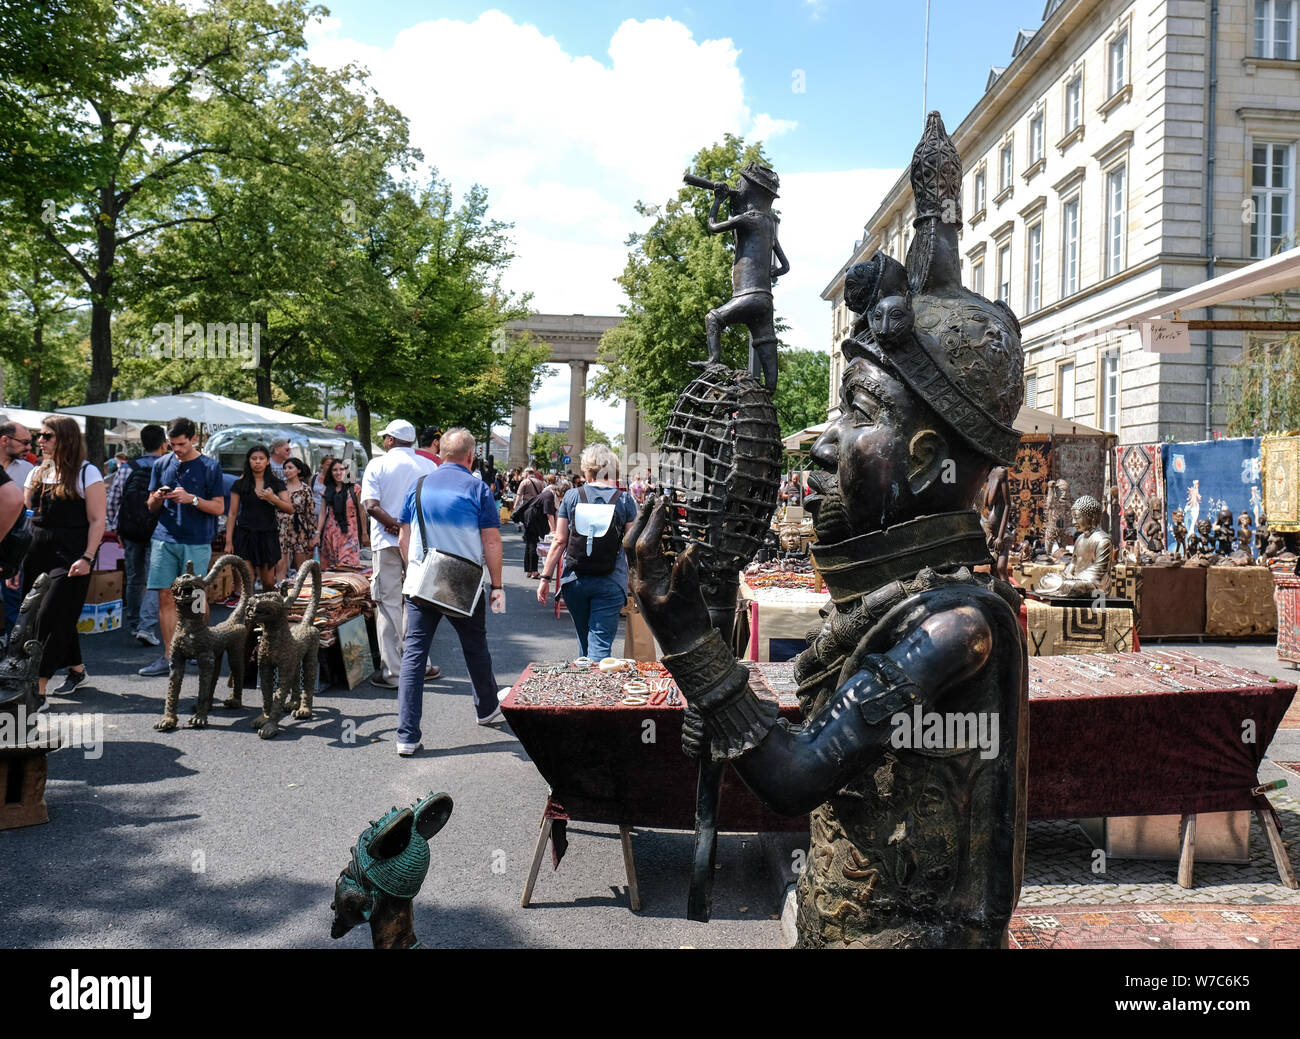 04 August 2019, Berlin: Since 1973 the flea market and art market Charlottenburger Flehmarkt at the Straße des 17. Juni takes place every Saturday and Sunday at the Charlottenburger Tor in the Berlin district Charlottenburg from 10 to 17 o'clock. Photo: Jens Kalaene/dpa-Zentralbild/ZB Stock Photo